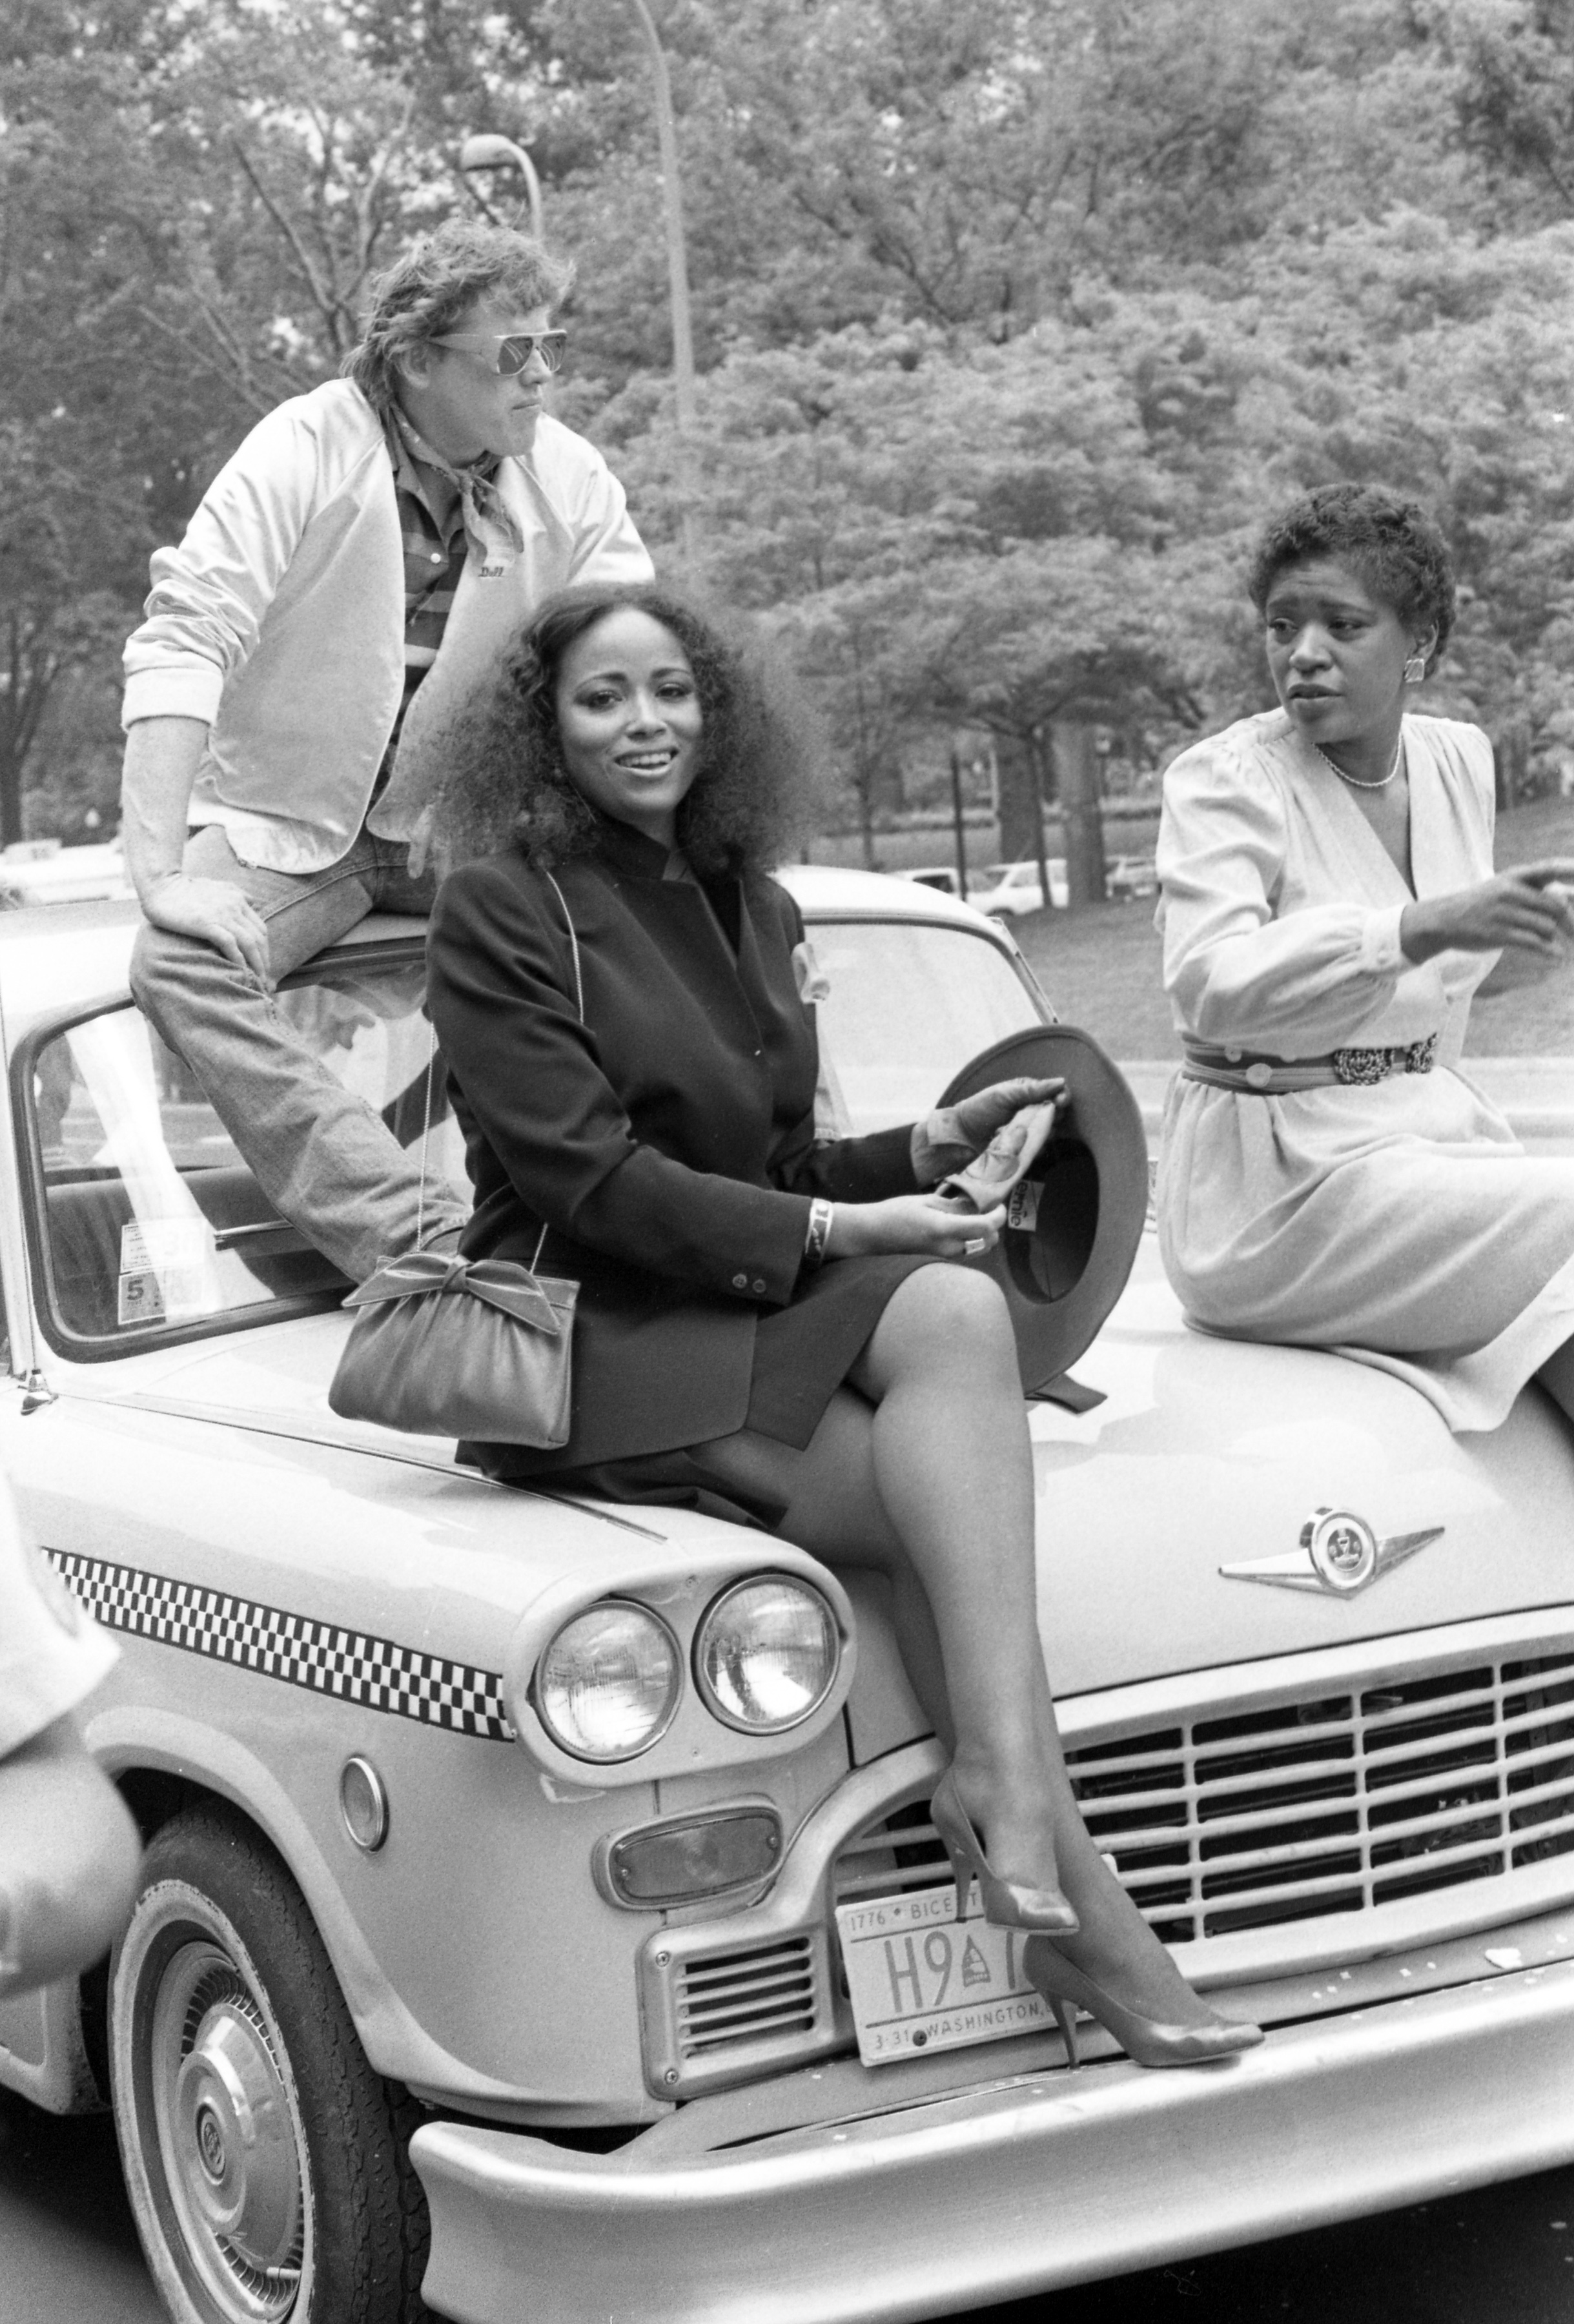 Gary Busey with Denise Gordy and Marsha Warfield on the set of the film "DC Cab" in 1983. | Source: Getty Images